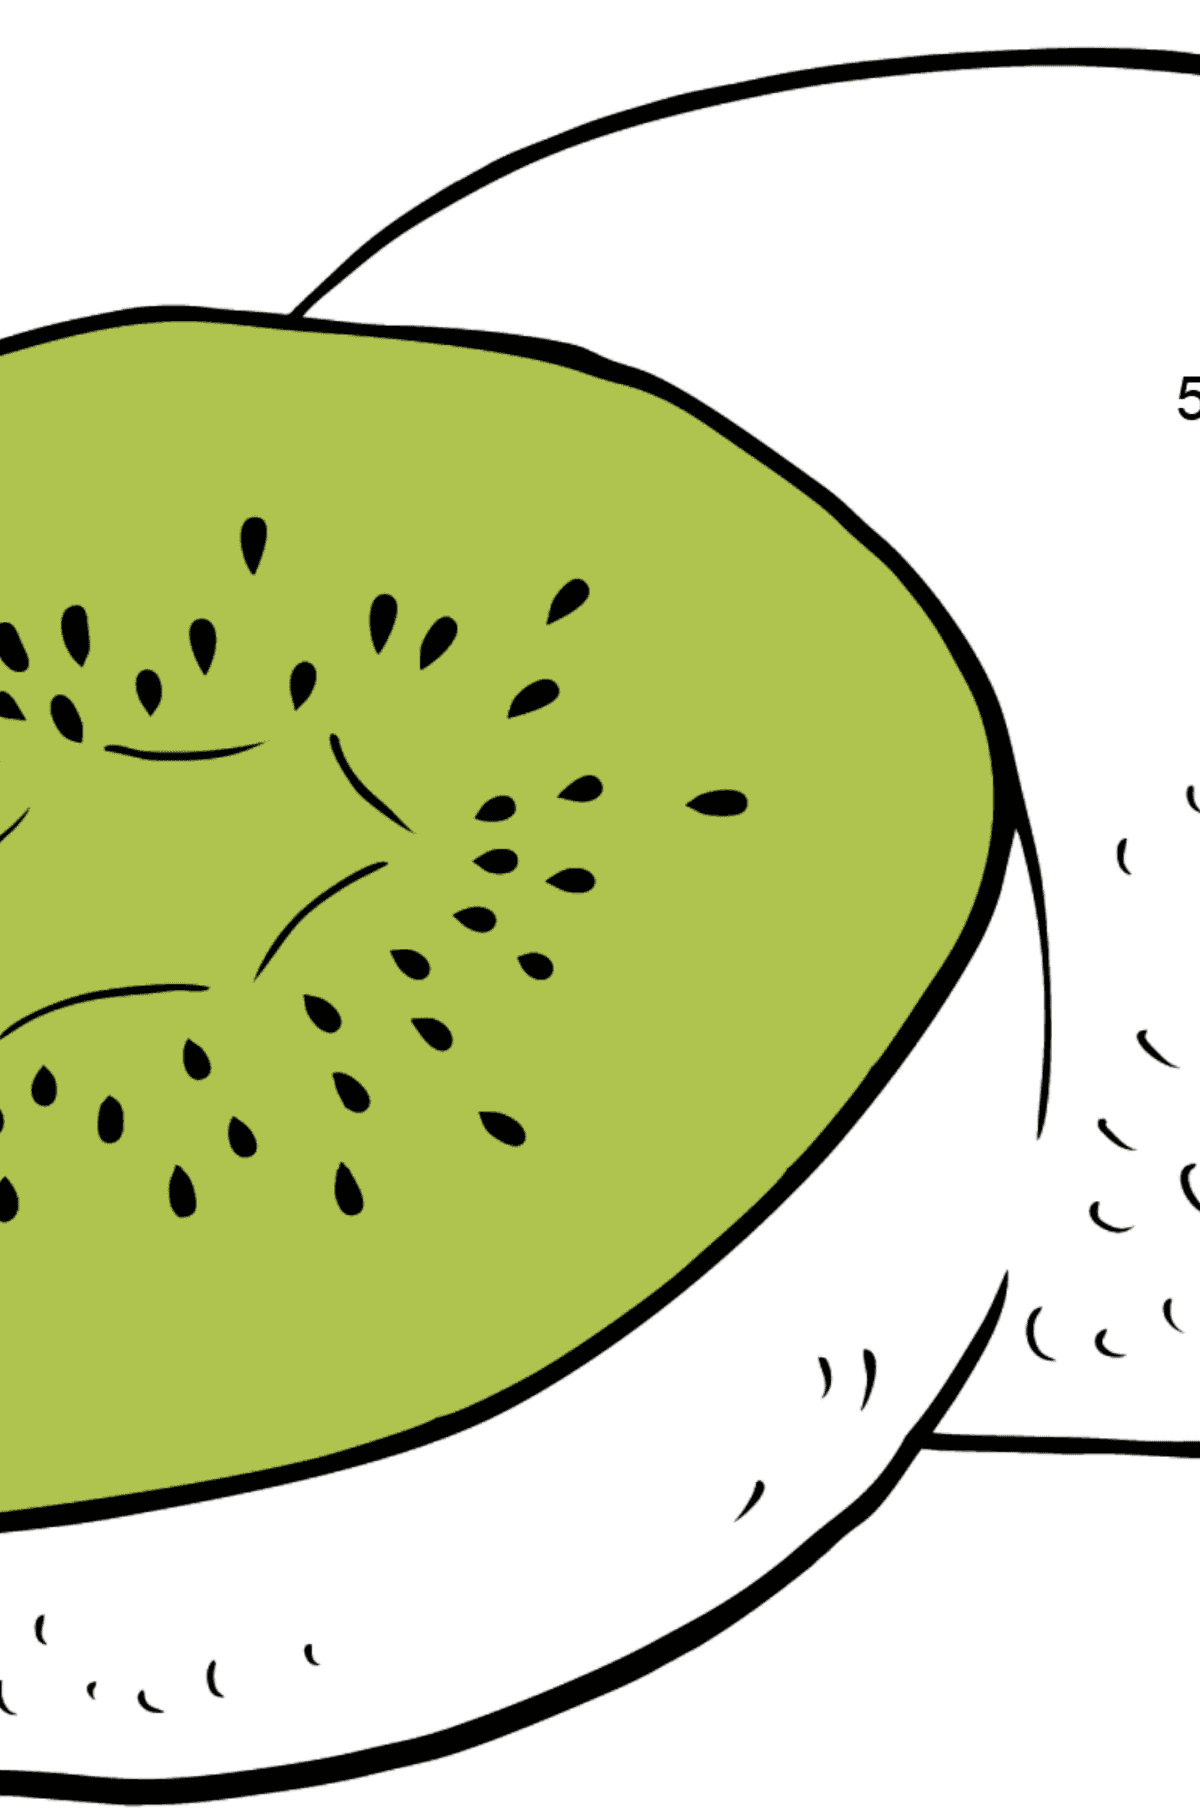 Kiwi coloring page - Math Coloring - Division for Kids